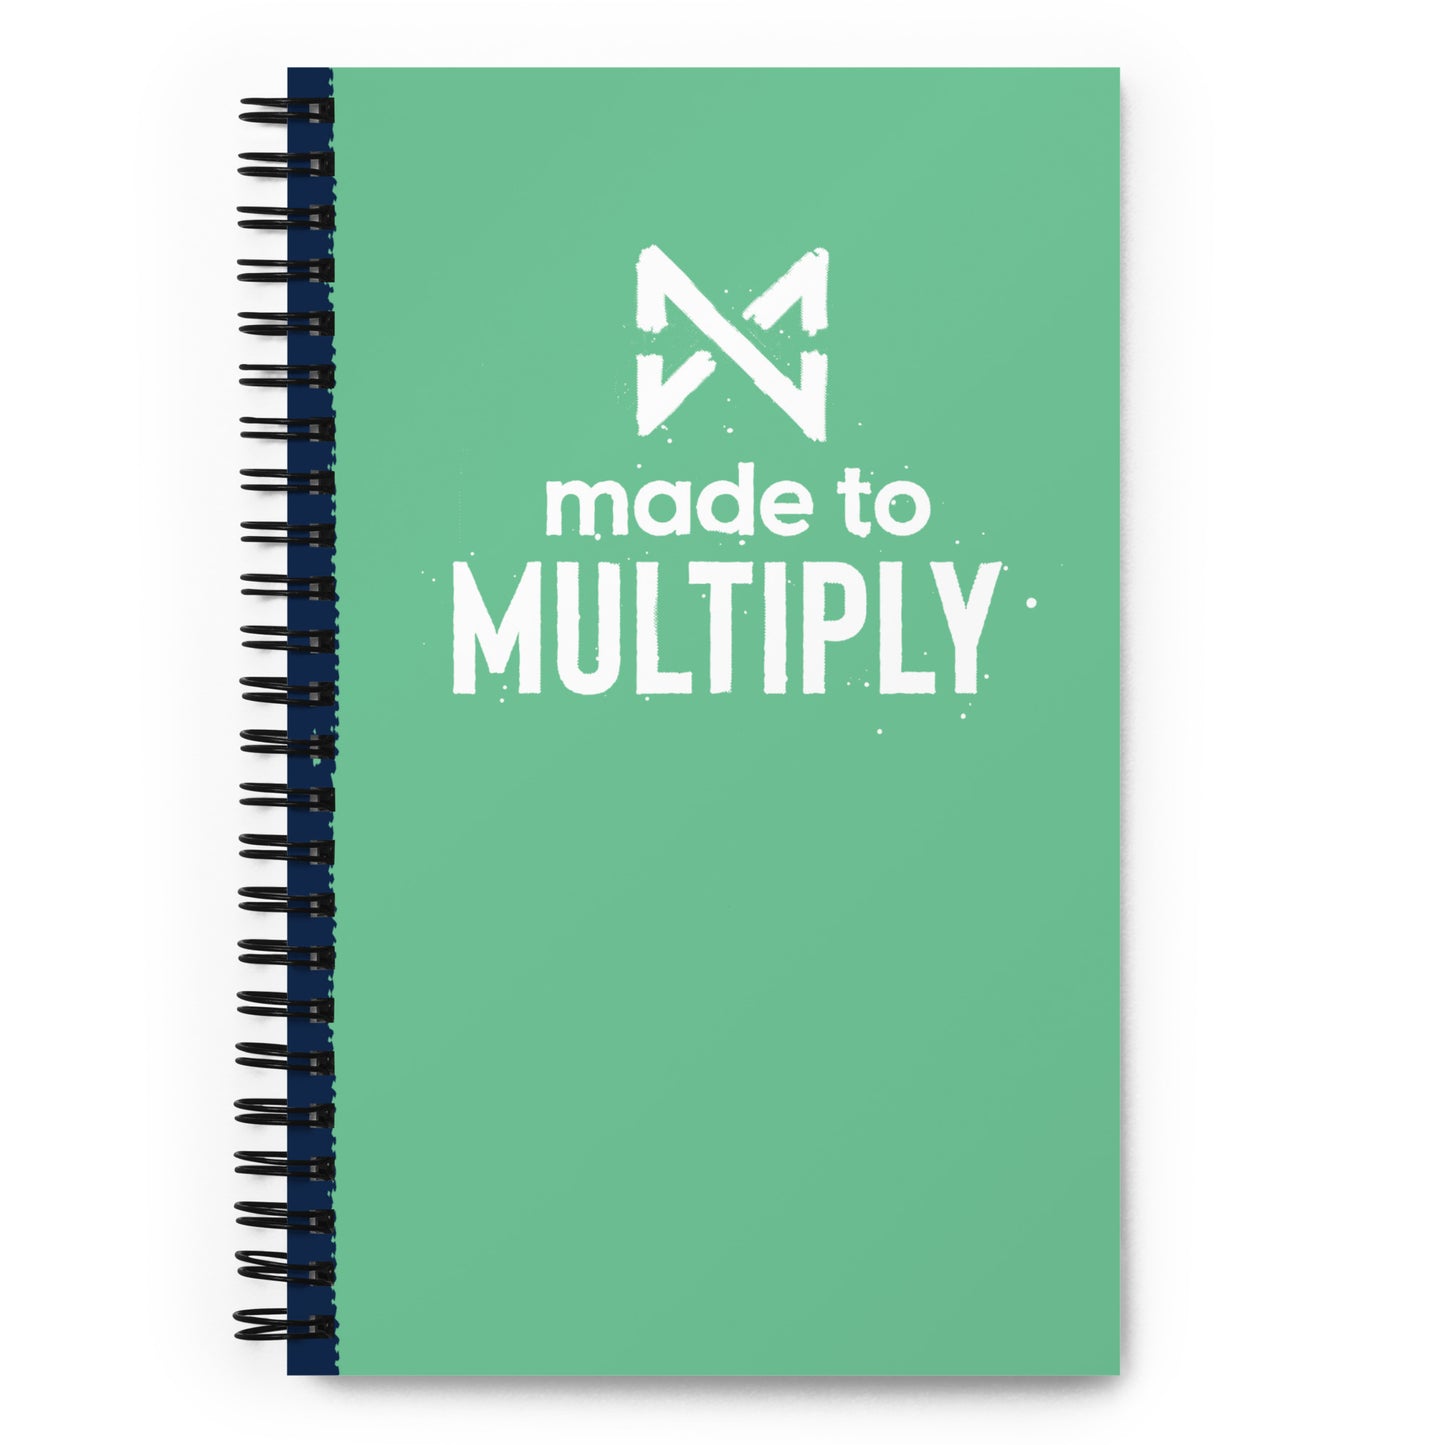 Made to Multiply - Spiral Notebook